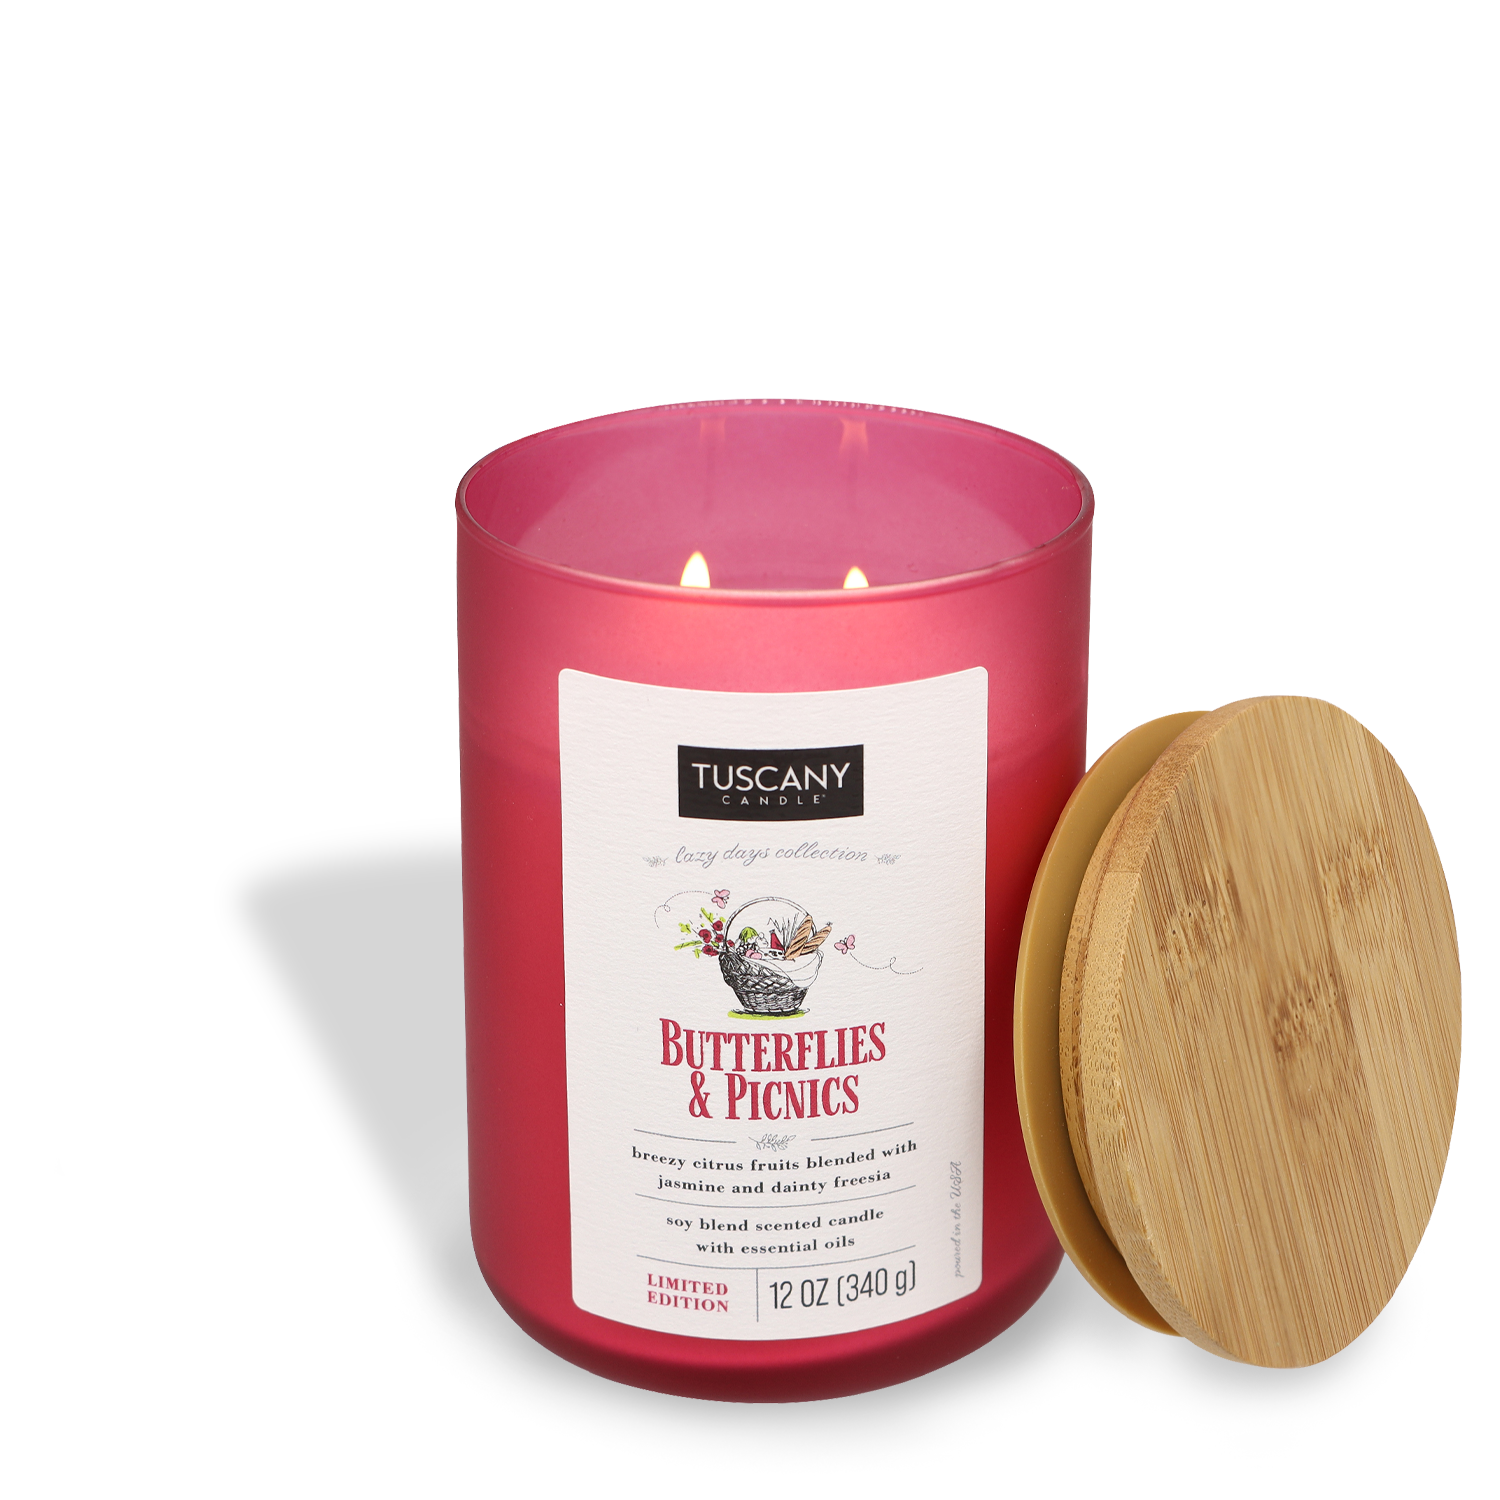 A Butterflies & Picnics scented candle with a pink label and a wooden lid off to the side.